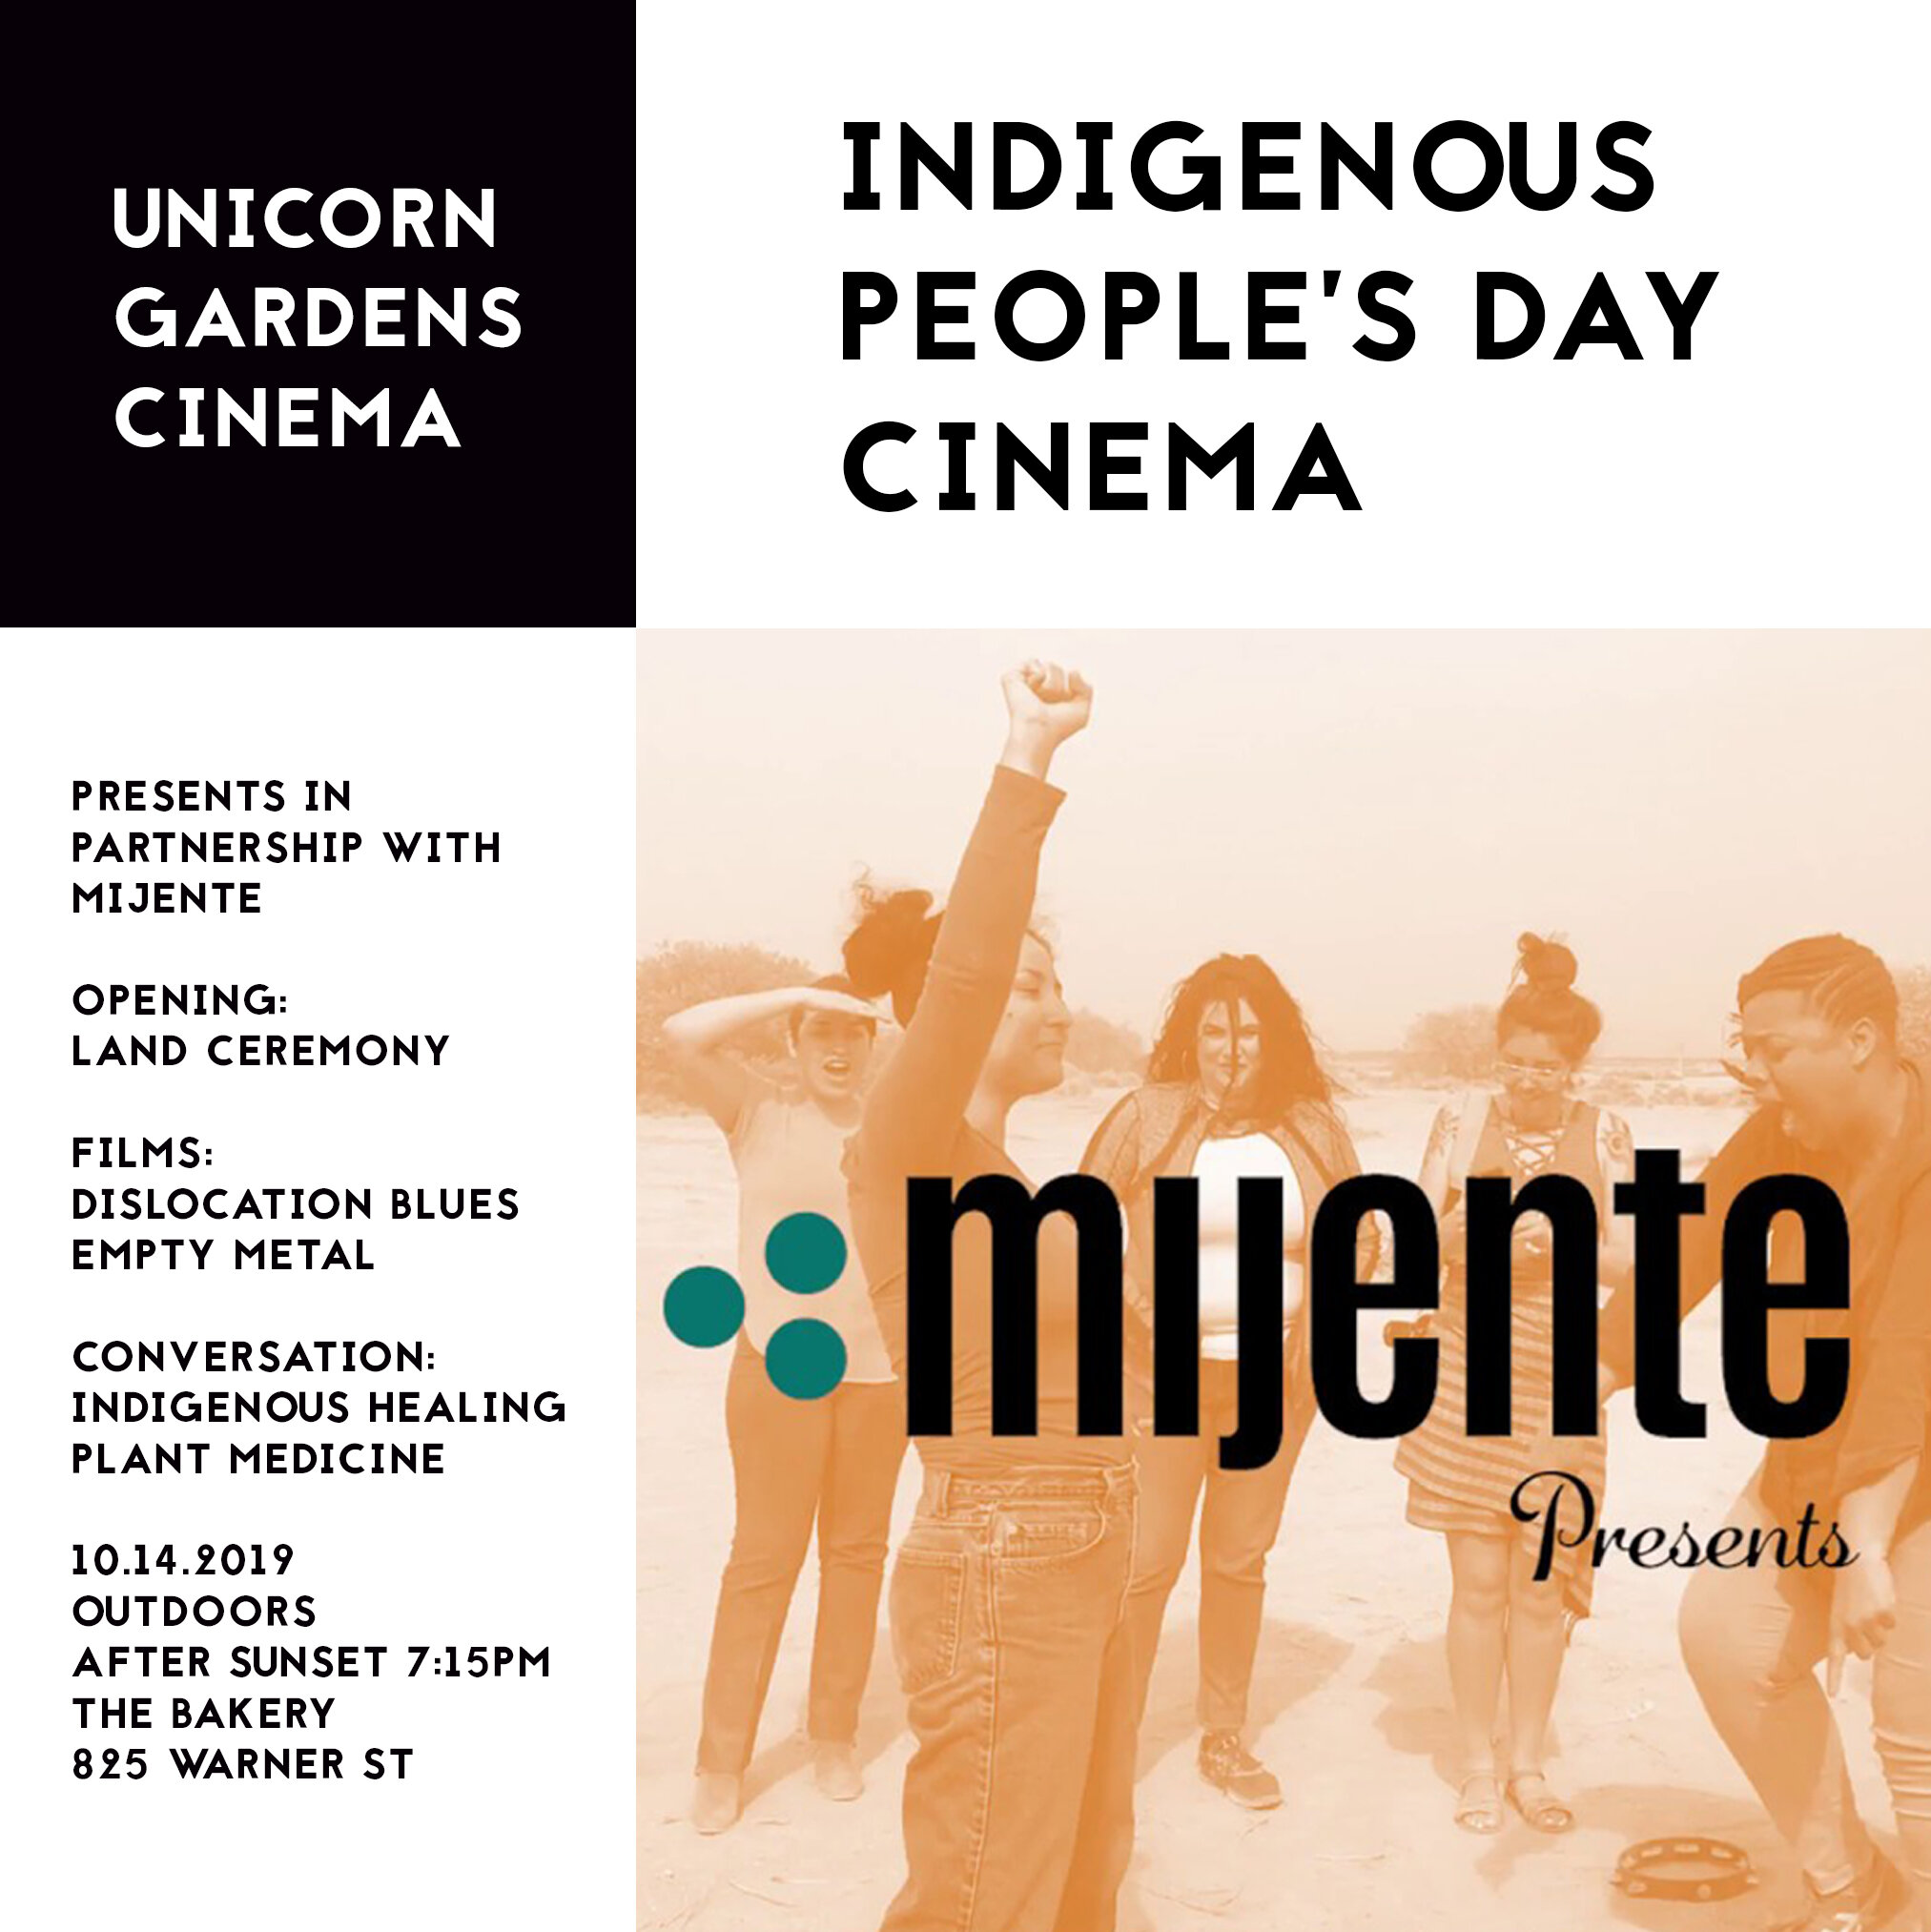 Indigenous People's Day Cinema - October 14, 2019